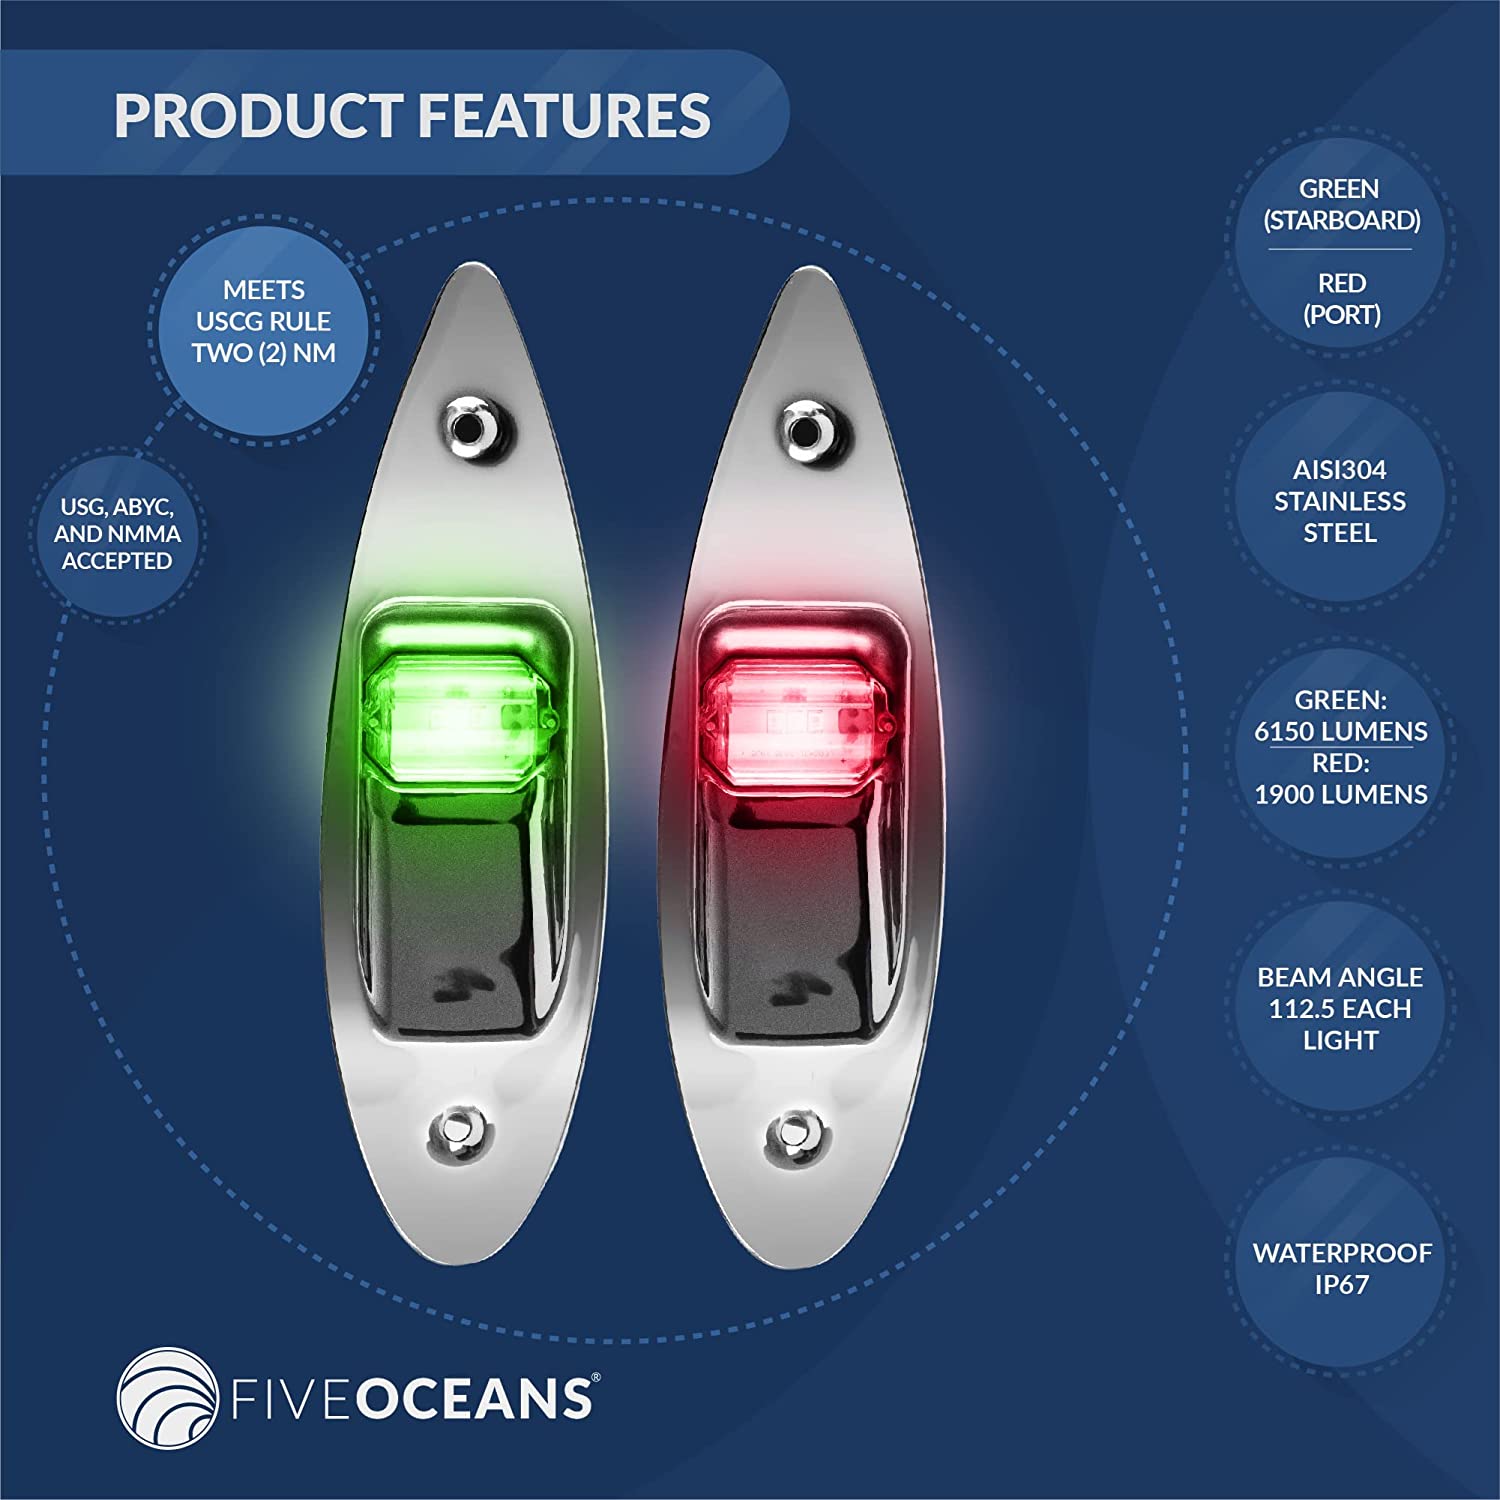 Vertical Mount LED Navigation Side Lights, Starboard (Green) and Port (Red), AISI304 Stainless Steel, 12 Volts, Visibility 2 NM-Canadian Marine &amp; Outdoor Equipment